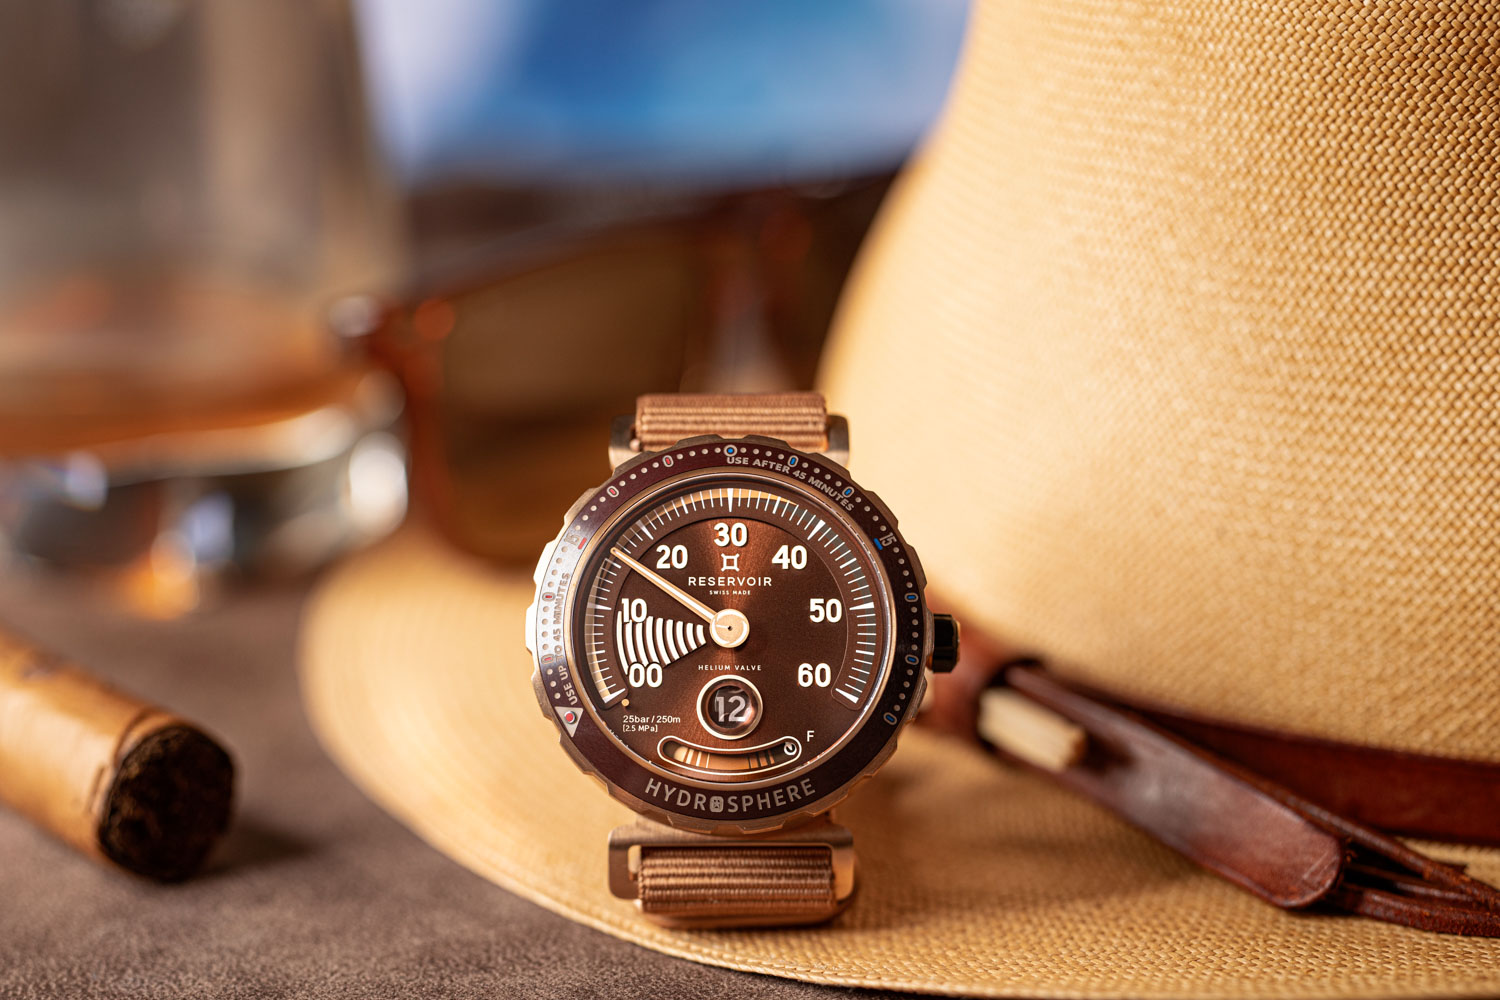 The Reservoir Hydrosphere Bronze x Revolution “The Maldives Edition” has a dial with the perfect colour of the sunset, and complemented by a beautiful sunray effect emanating from the centre (©Revolution)